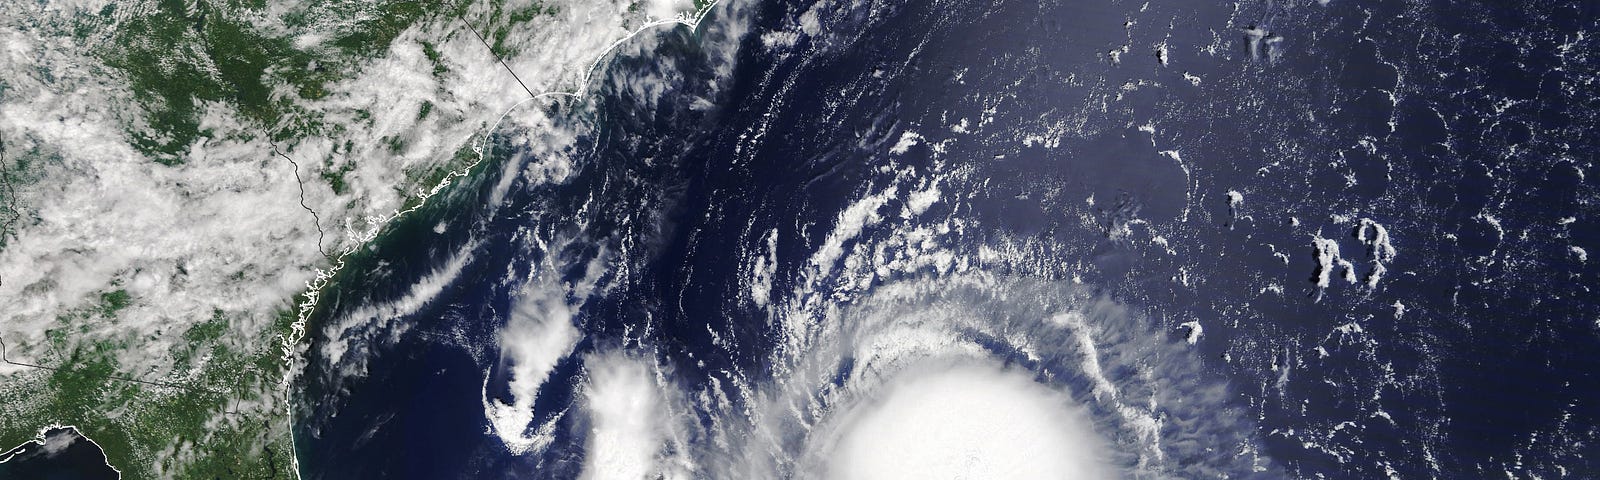 Tropical Storm Henri approaching the US East Coast. Credit: Nasa Earth Observatory.